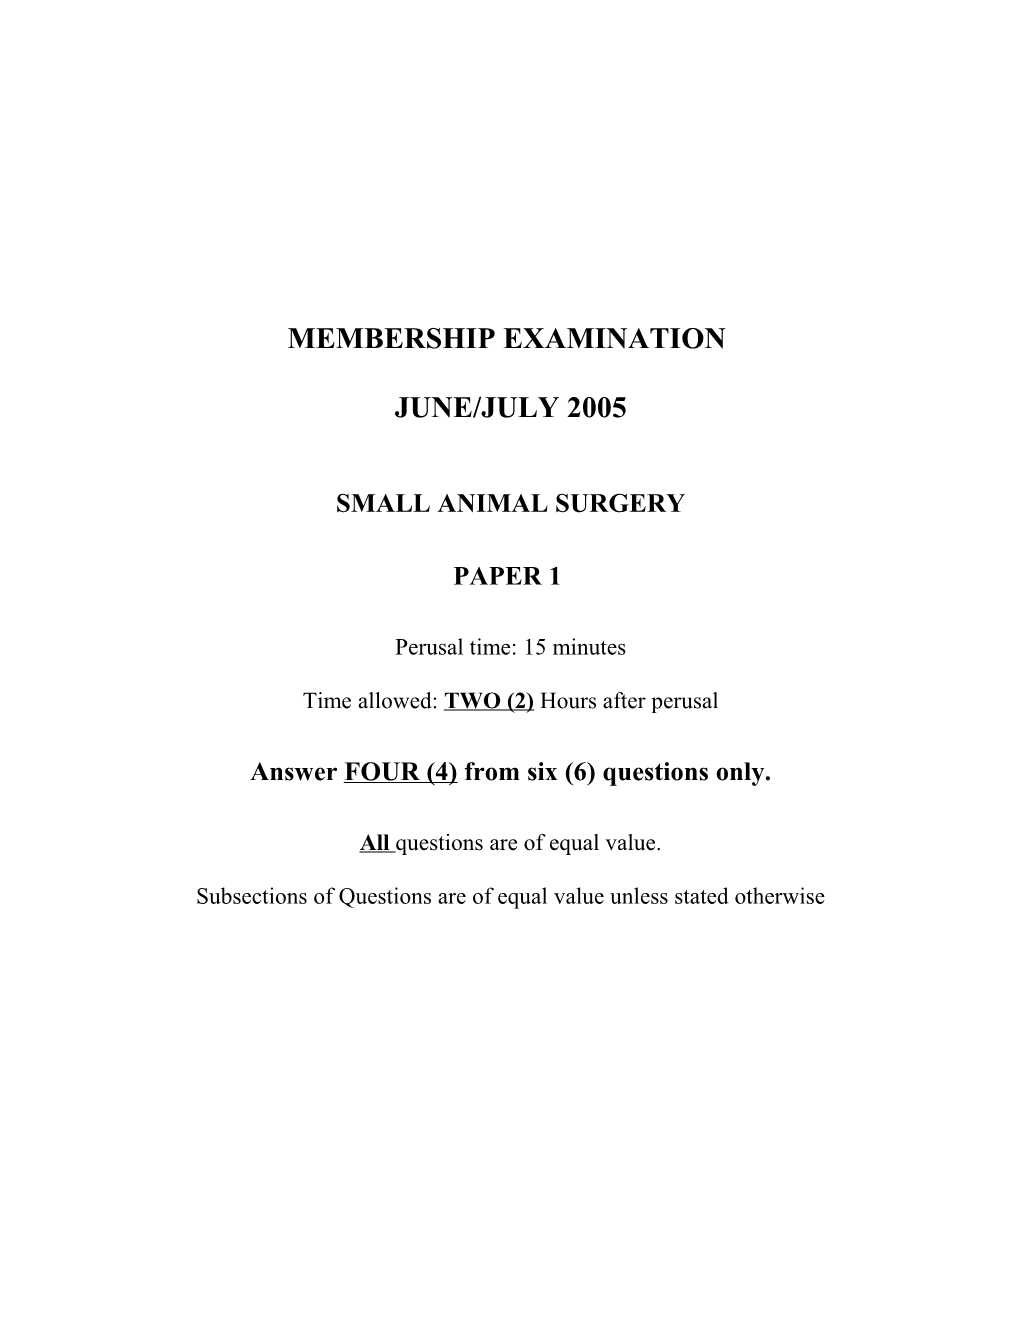 Paper 1 Small Animal Surgery